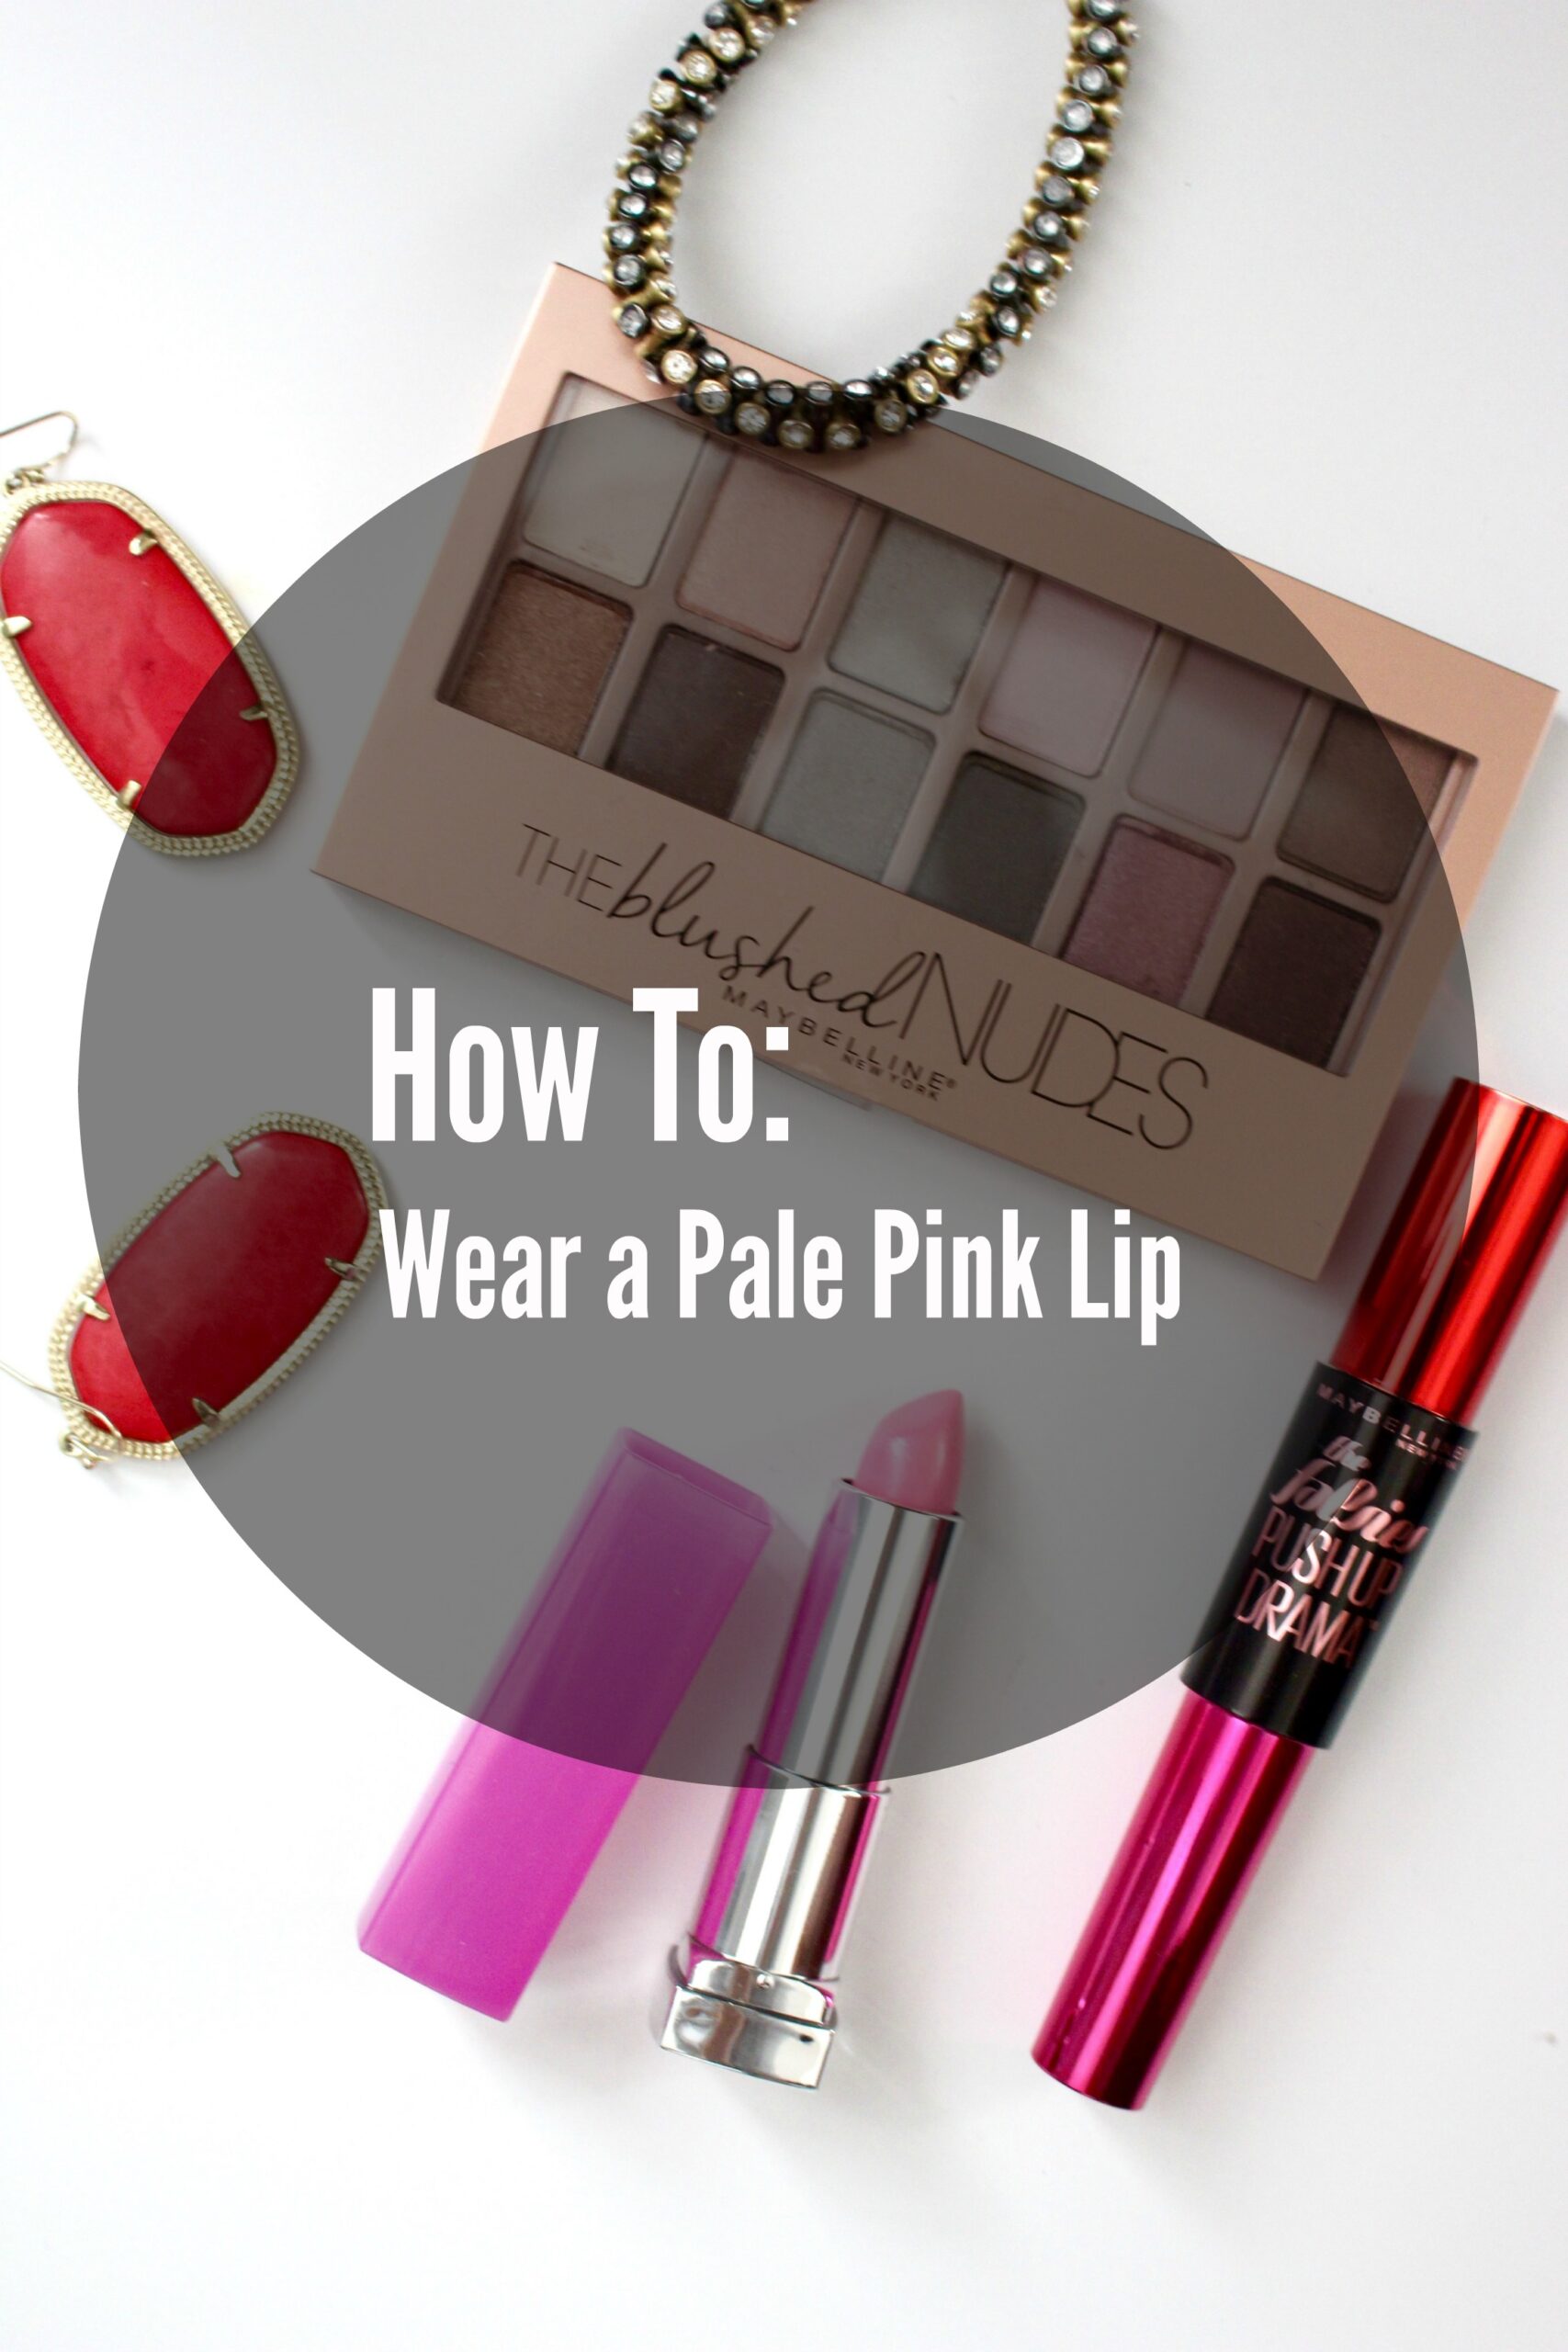 How To Wear a Pale Pink Lip